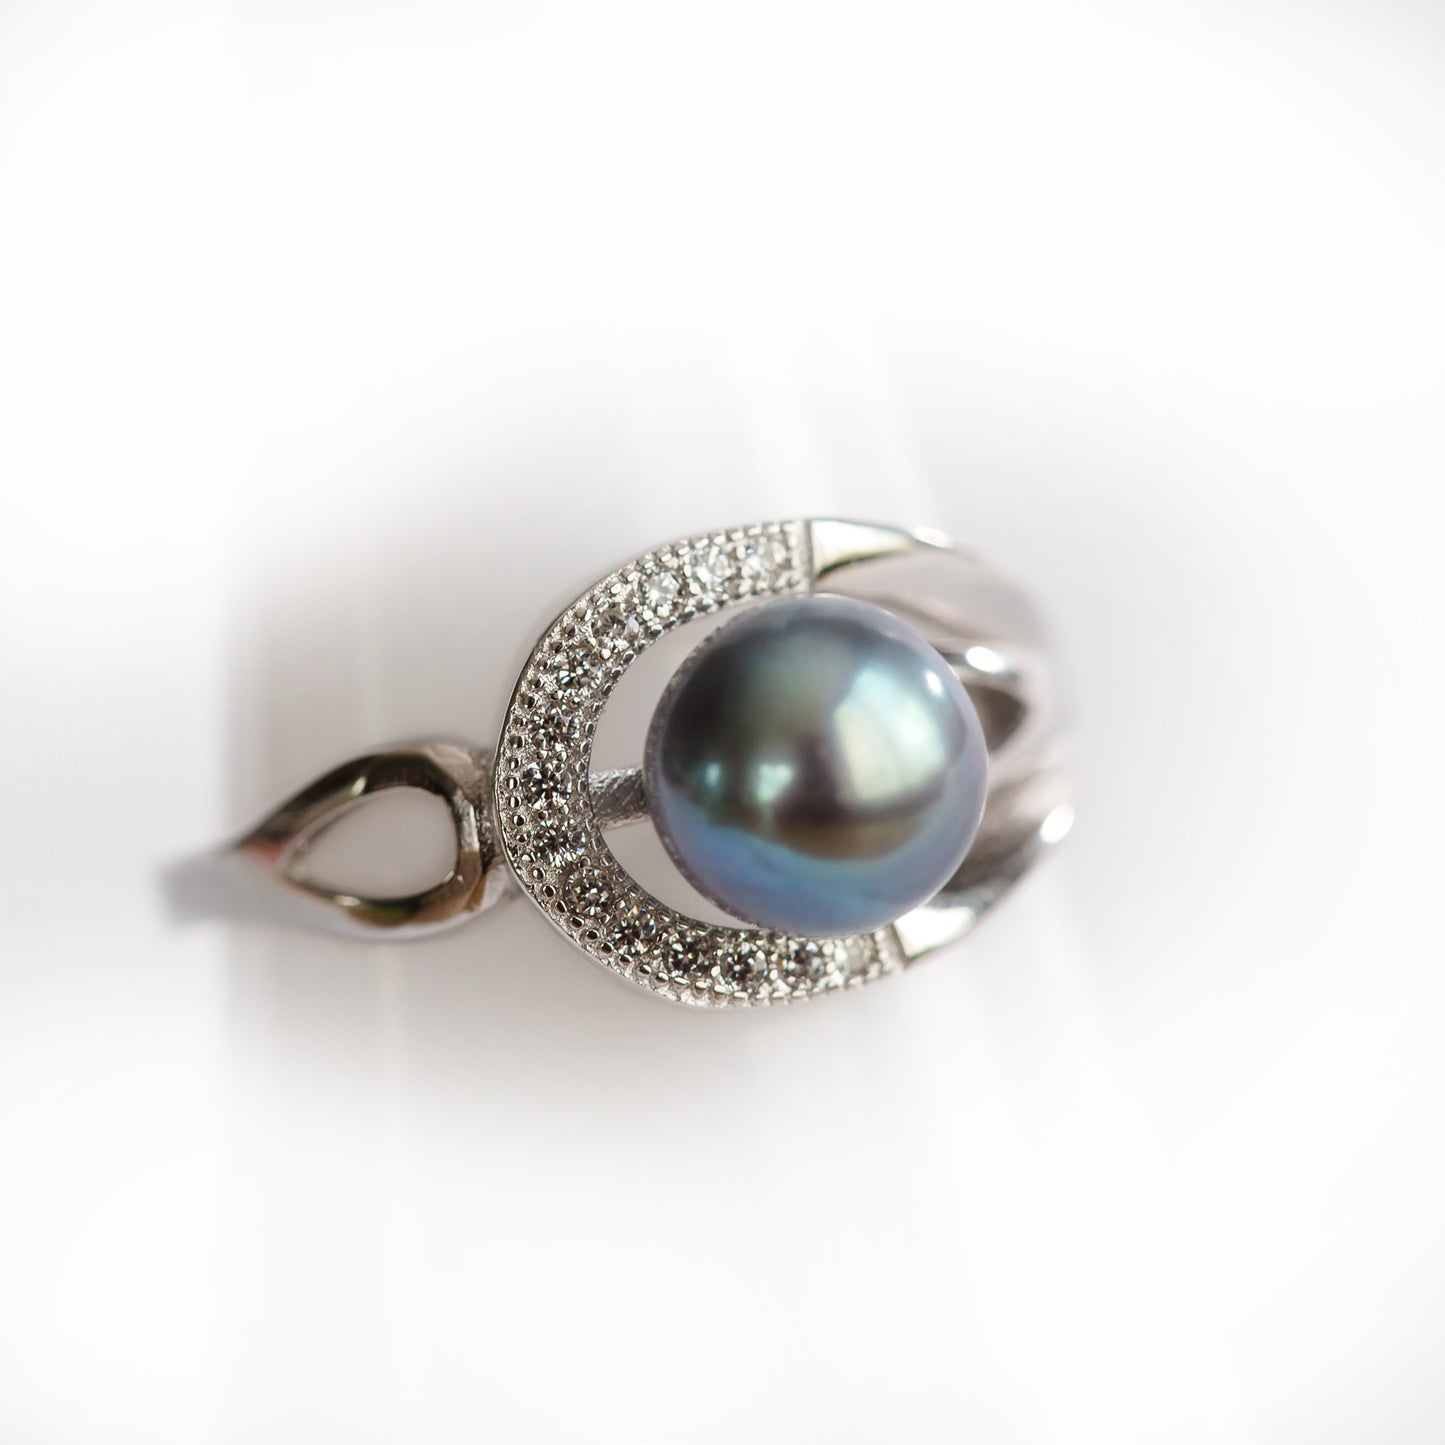 Sterling Silver Classic Ring